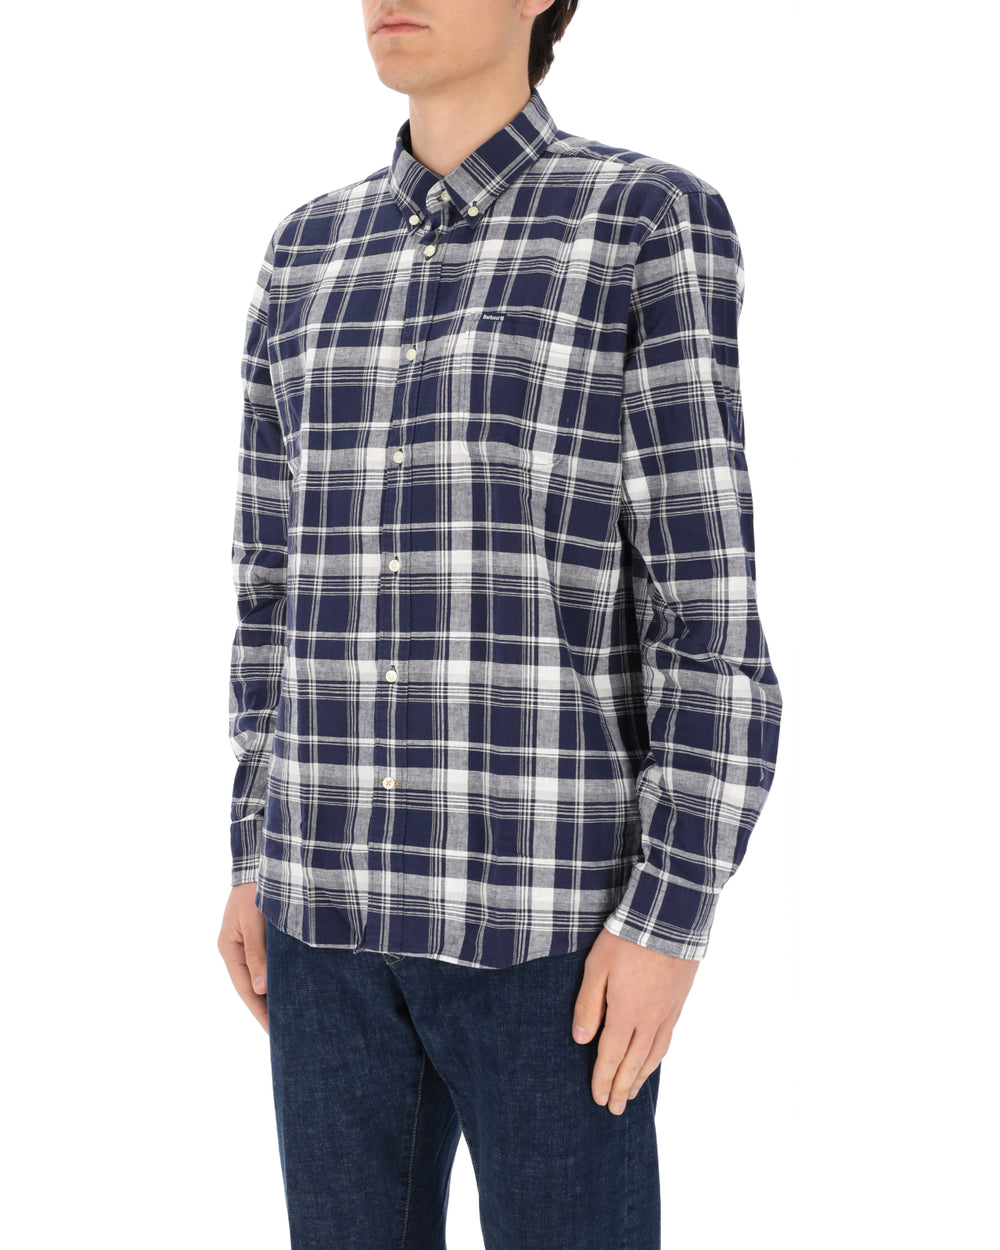 BARBOUR | CAMICIA | MSH5294 NY91